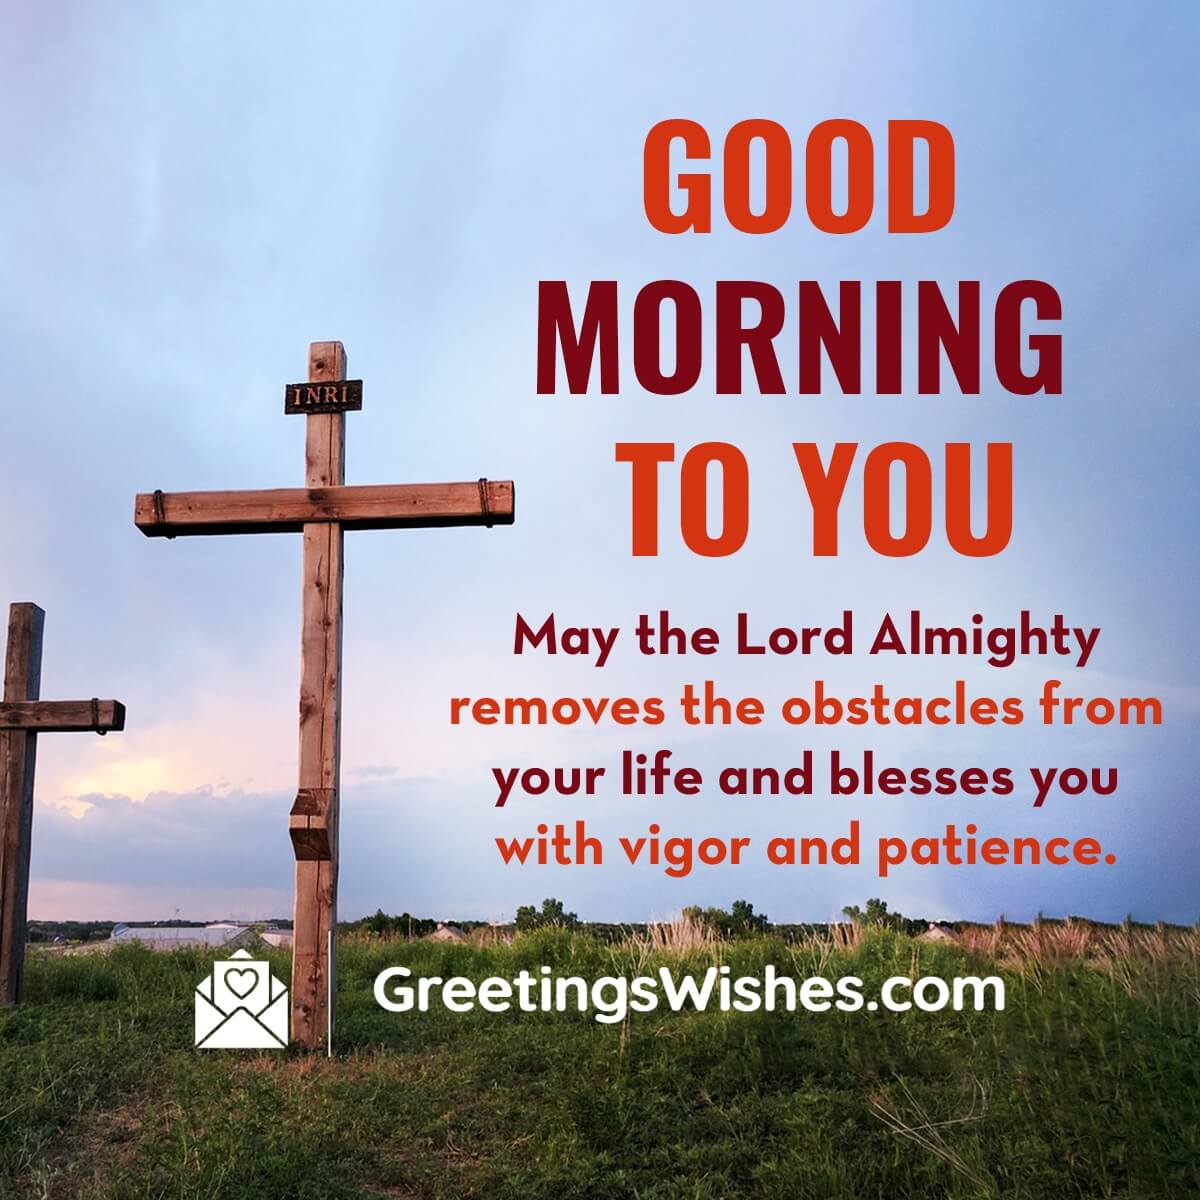 Christian Good Morning Wishes Messages - Greetings Wishes